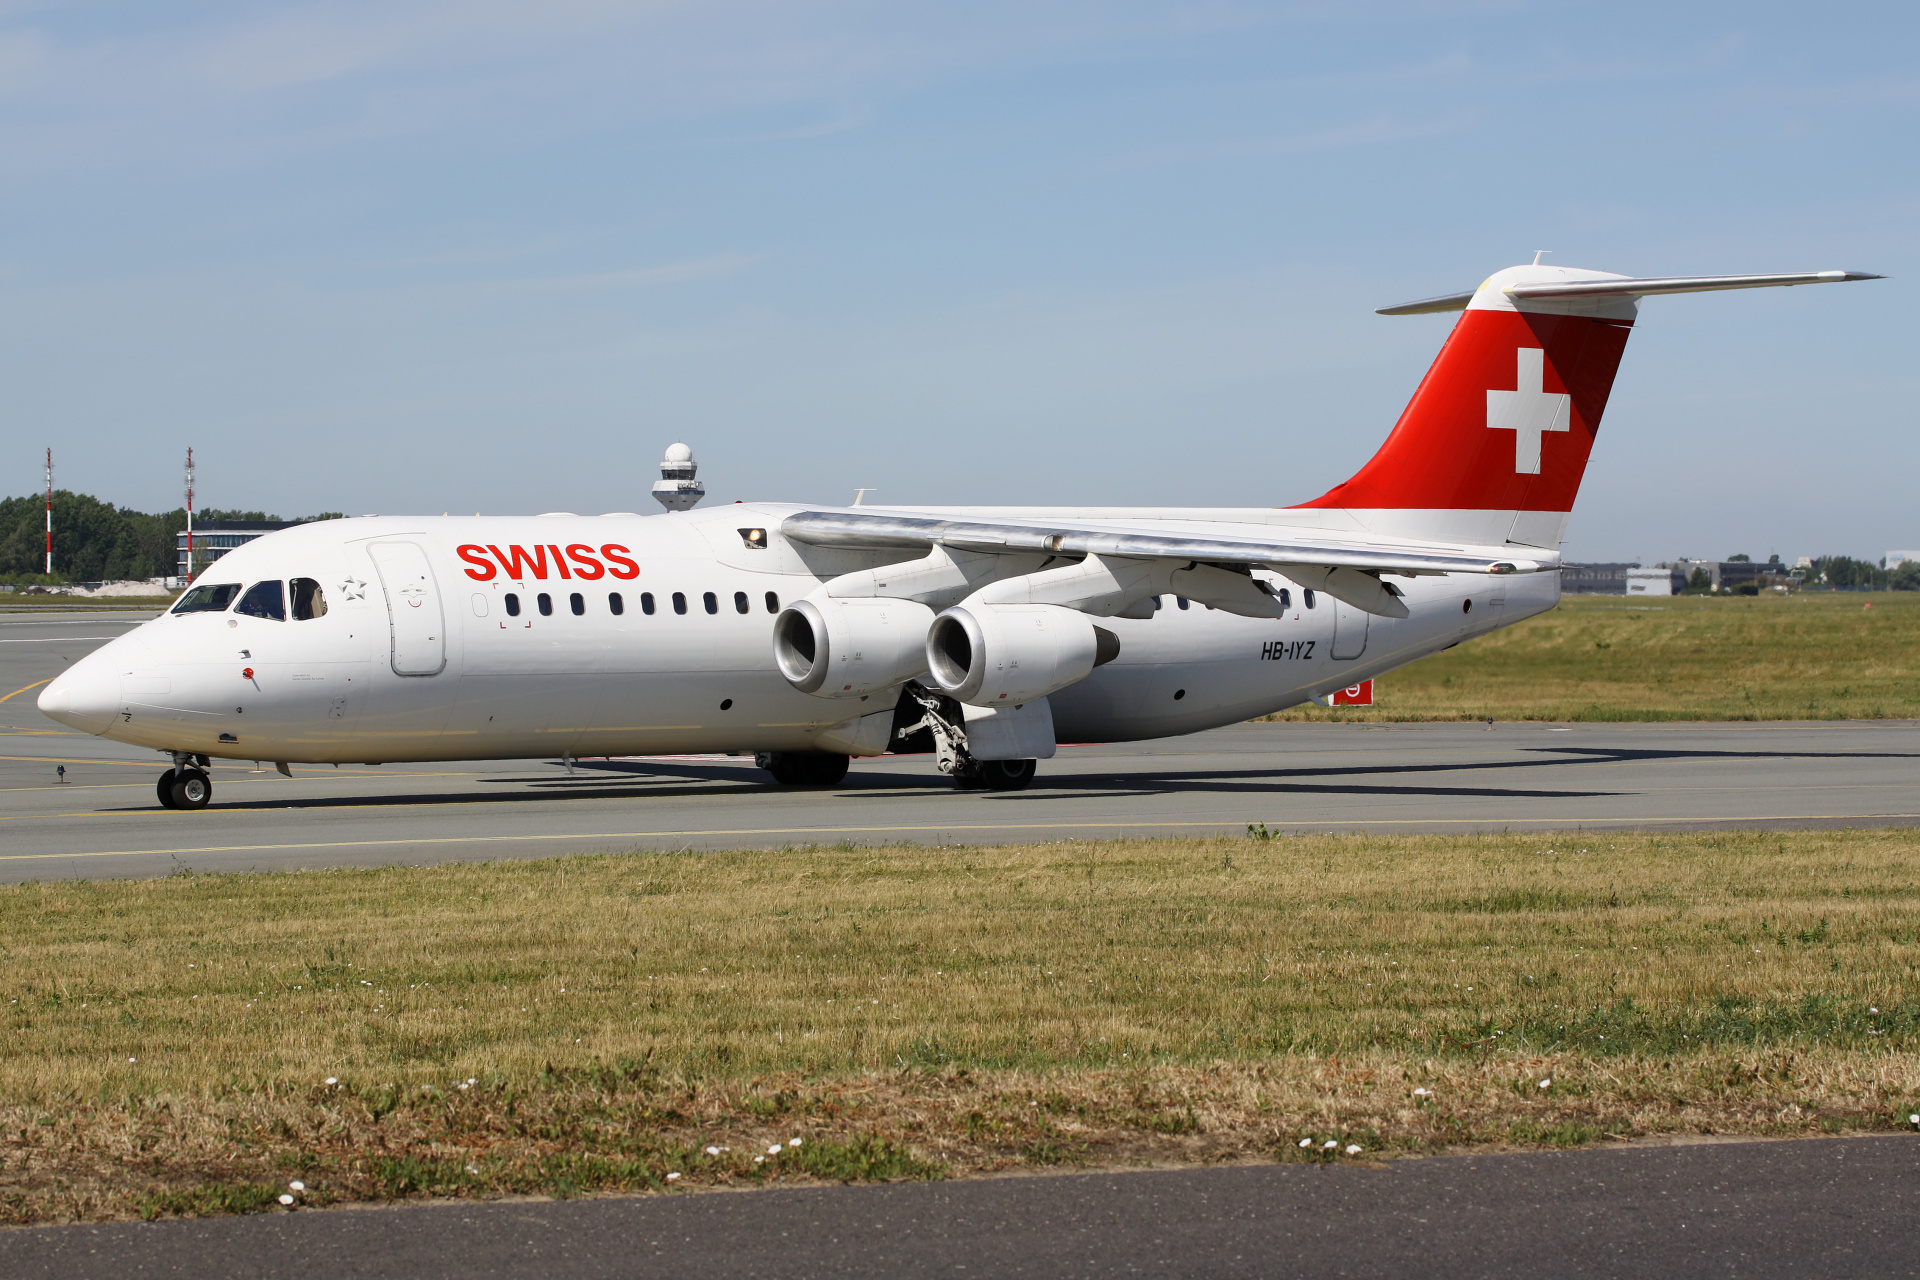 HB-IYZ (Aircraft » EPWA Spotting » BAe 146 and revisions » Avro RJ100 » Swiss Global Air Lines)